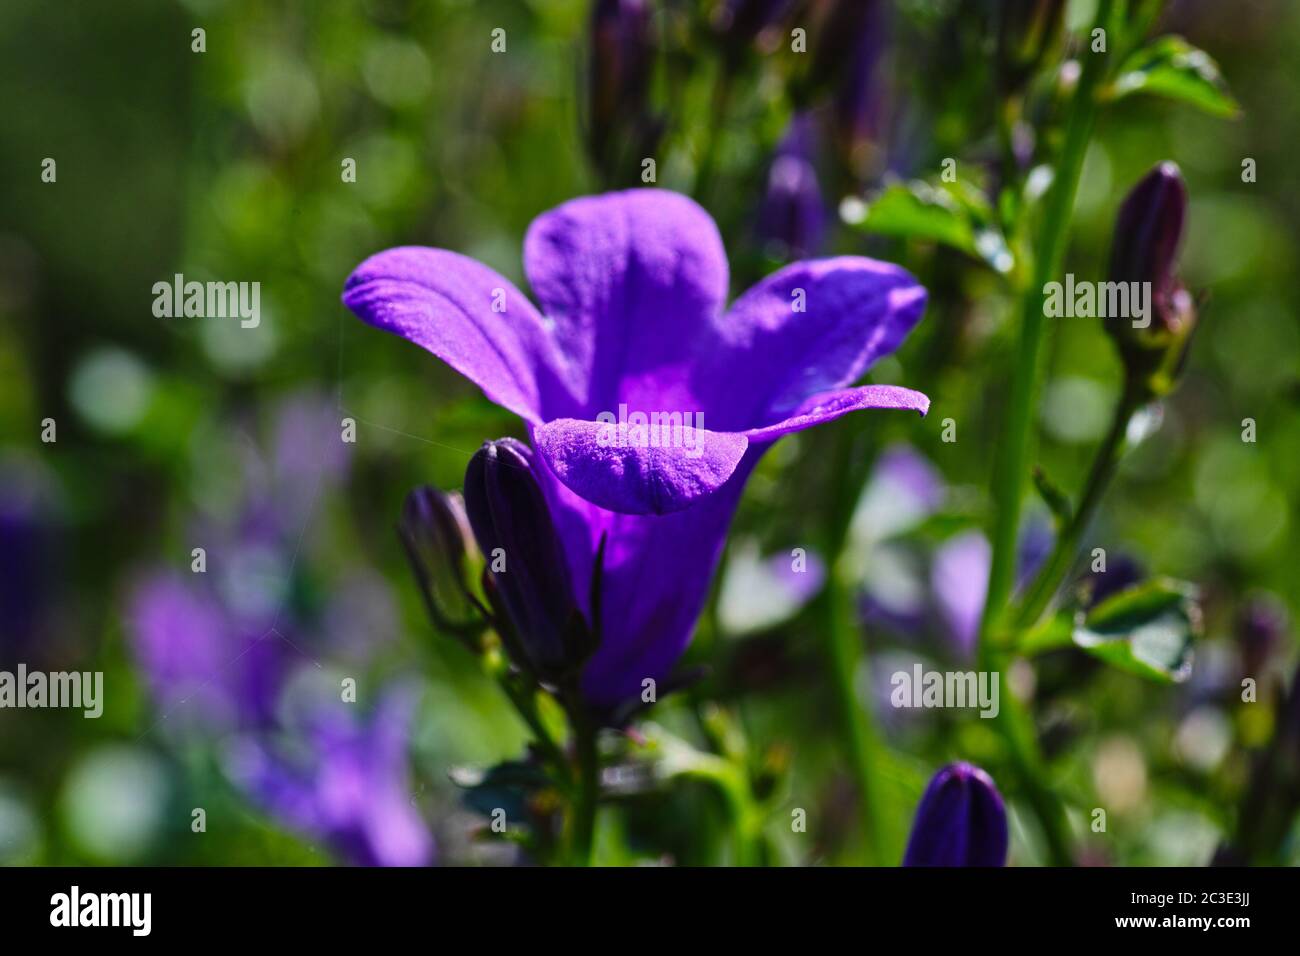 Flower plant in the genus Campanula of the family Campanulaceae. Stock Photo